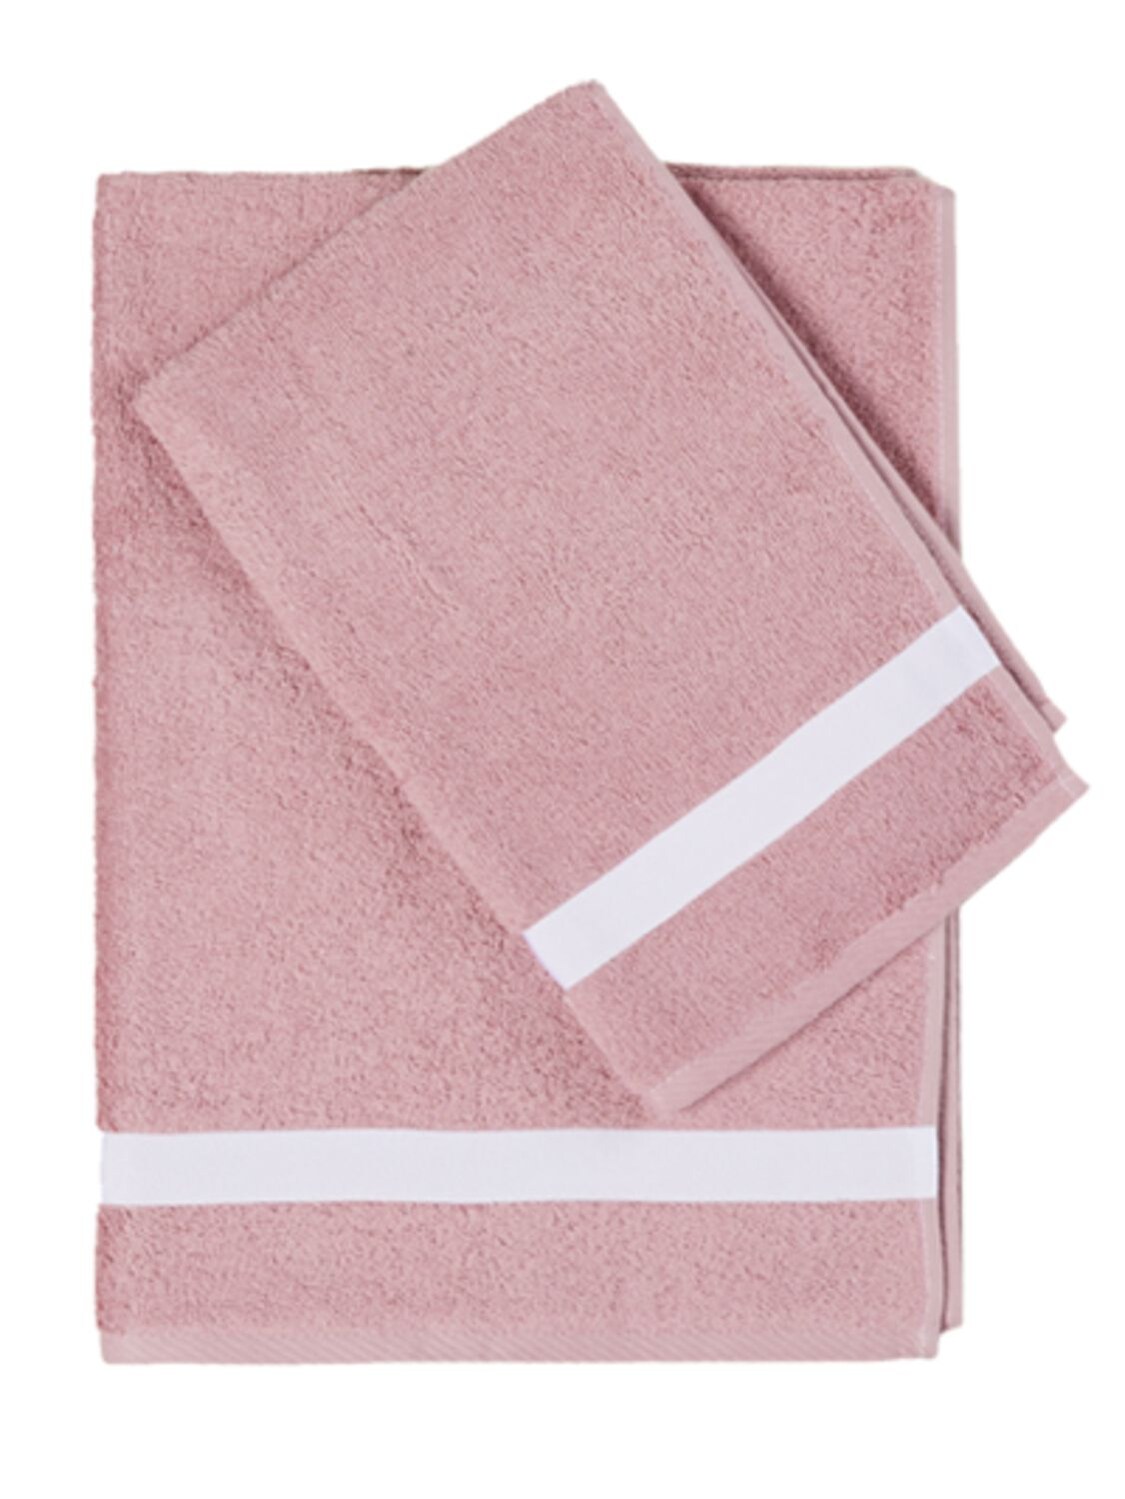 Alessandro Di Marco Set Of 2 Cotton Terrycloth Towels In Pink